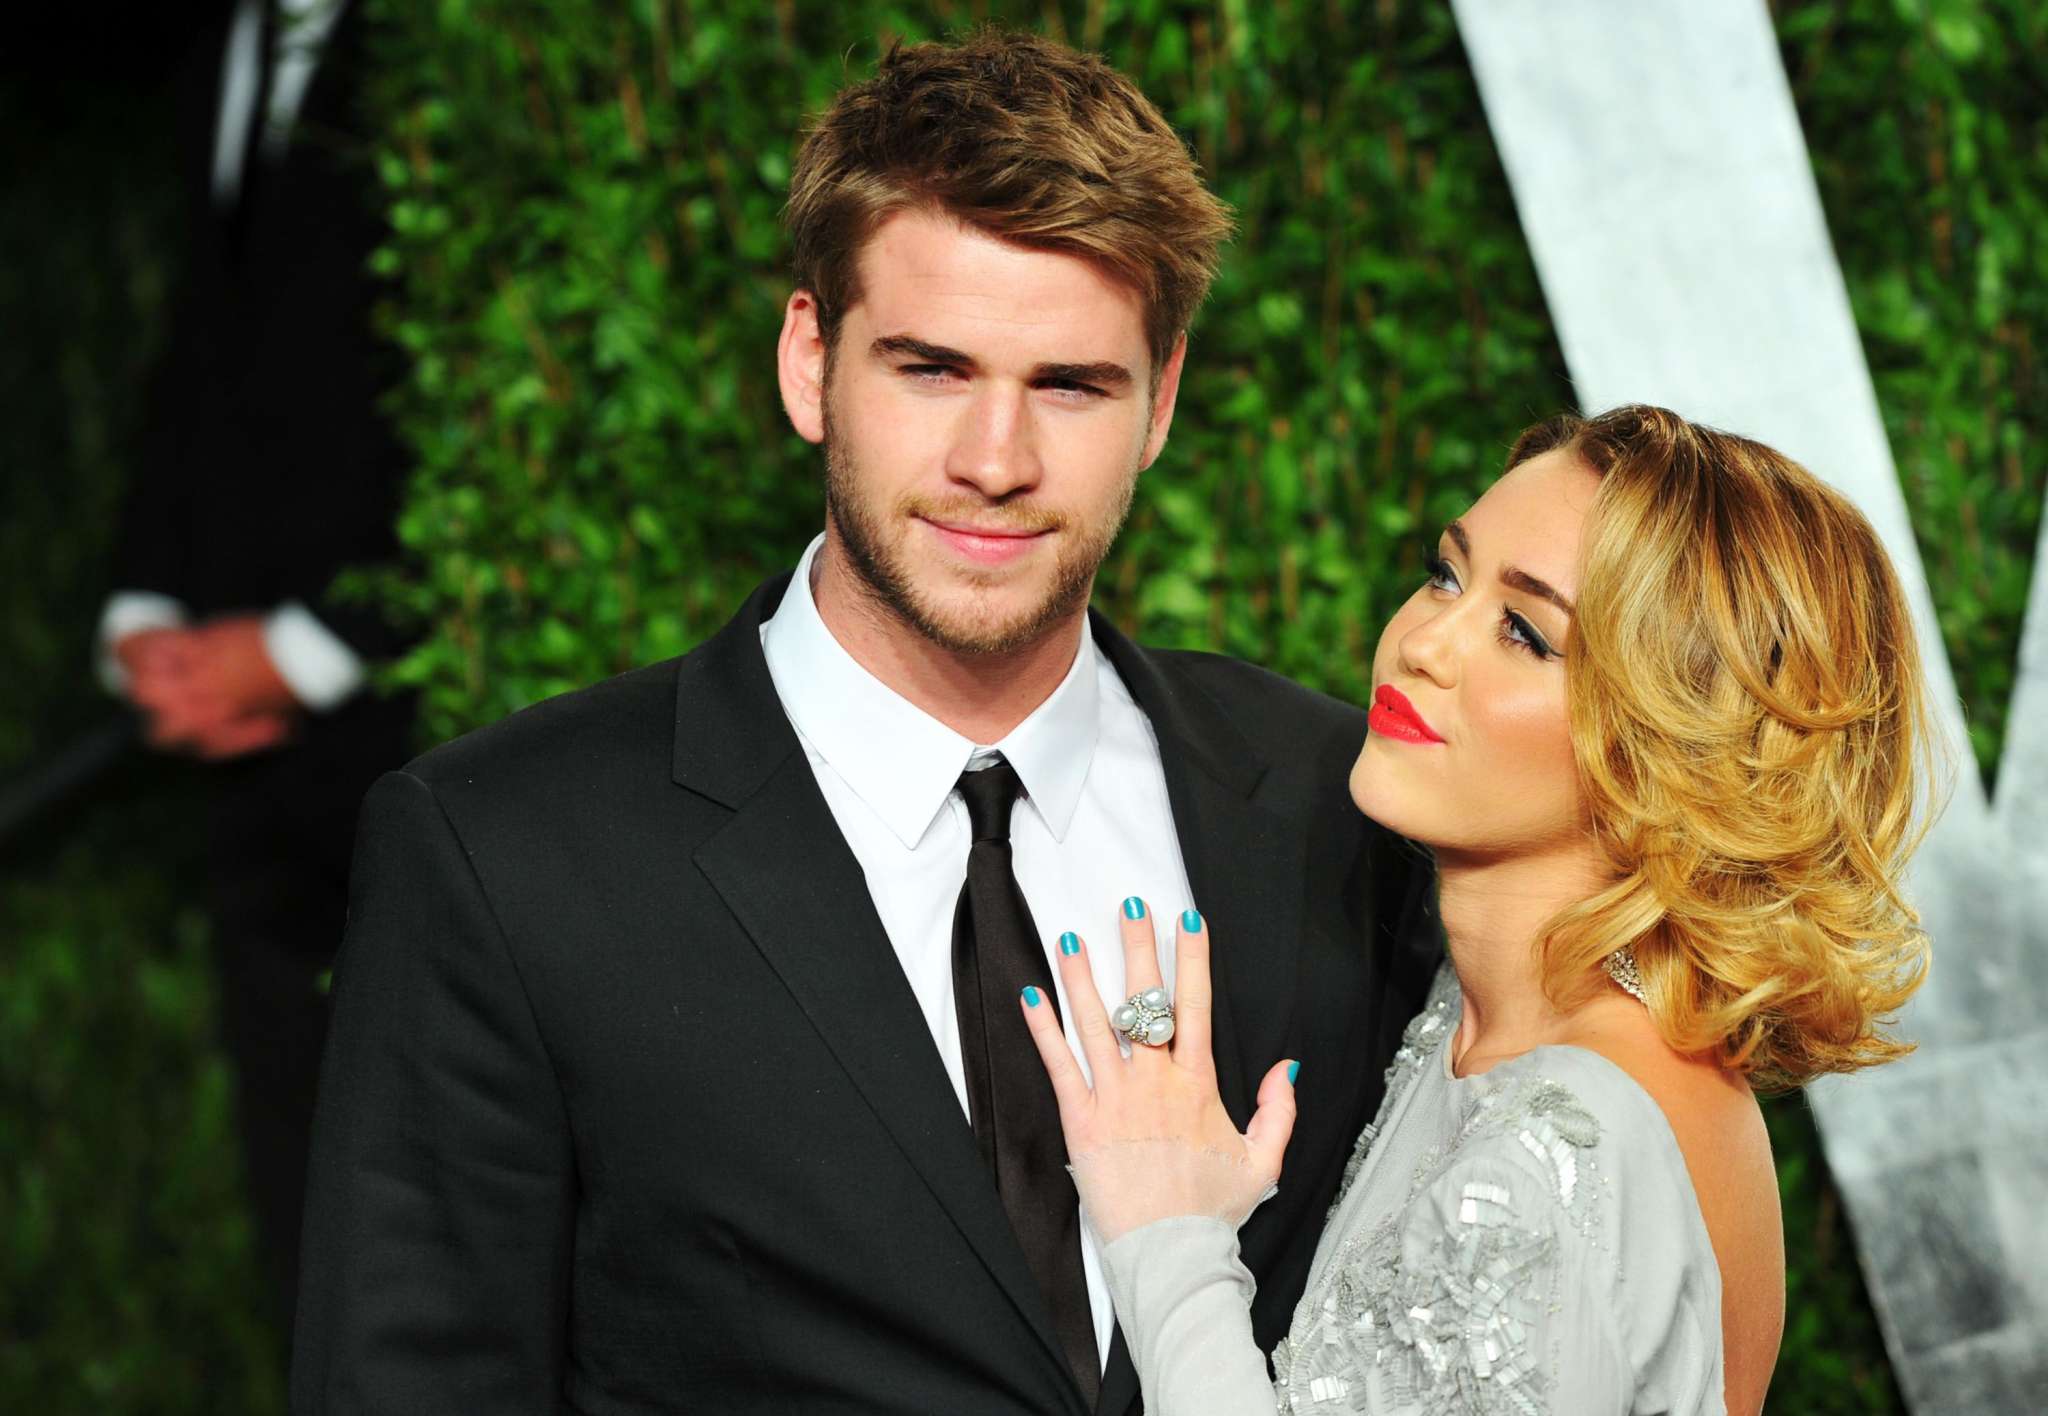 Miley Cyrus Confirms Marriage With Liam Hemsworth – Shares Stunning Wedding Pics ...2048 x 1416